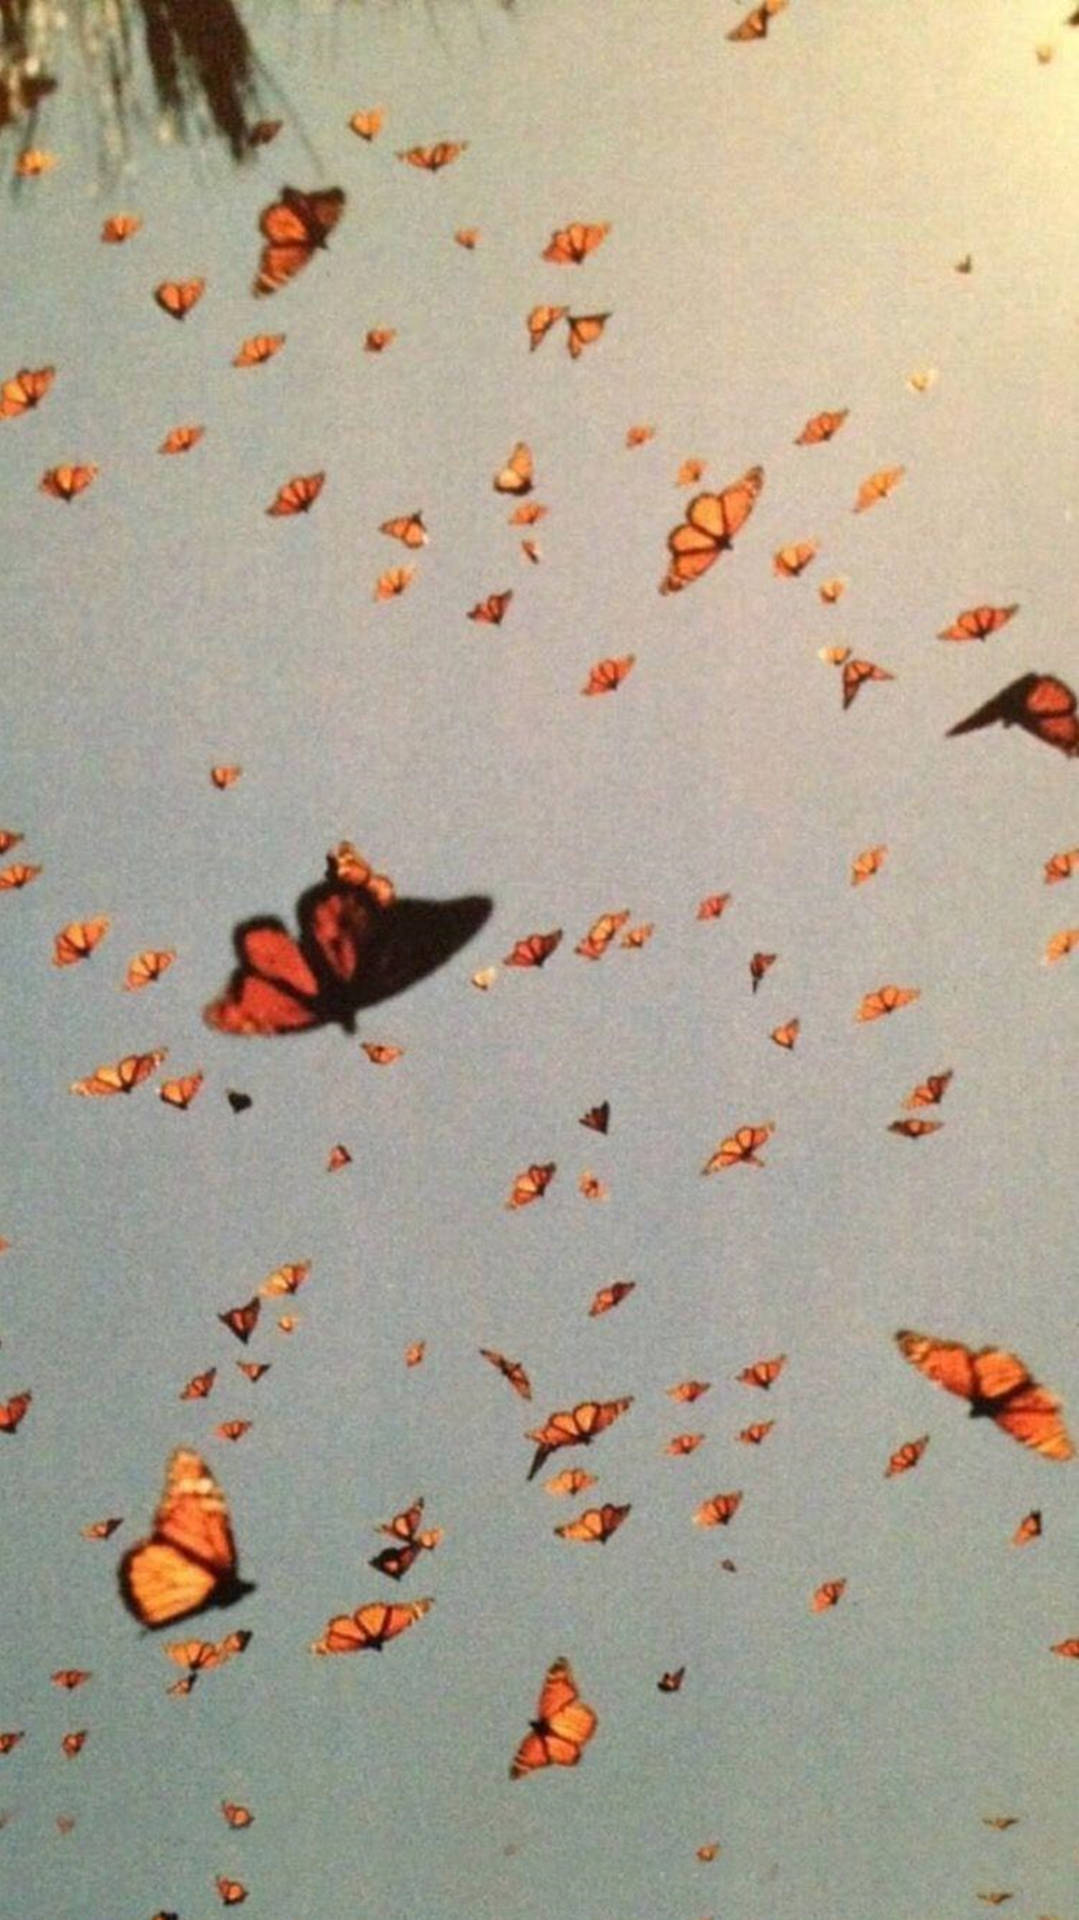 A large group of butterflies flying in the sky - VSCO